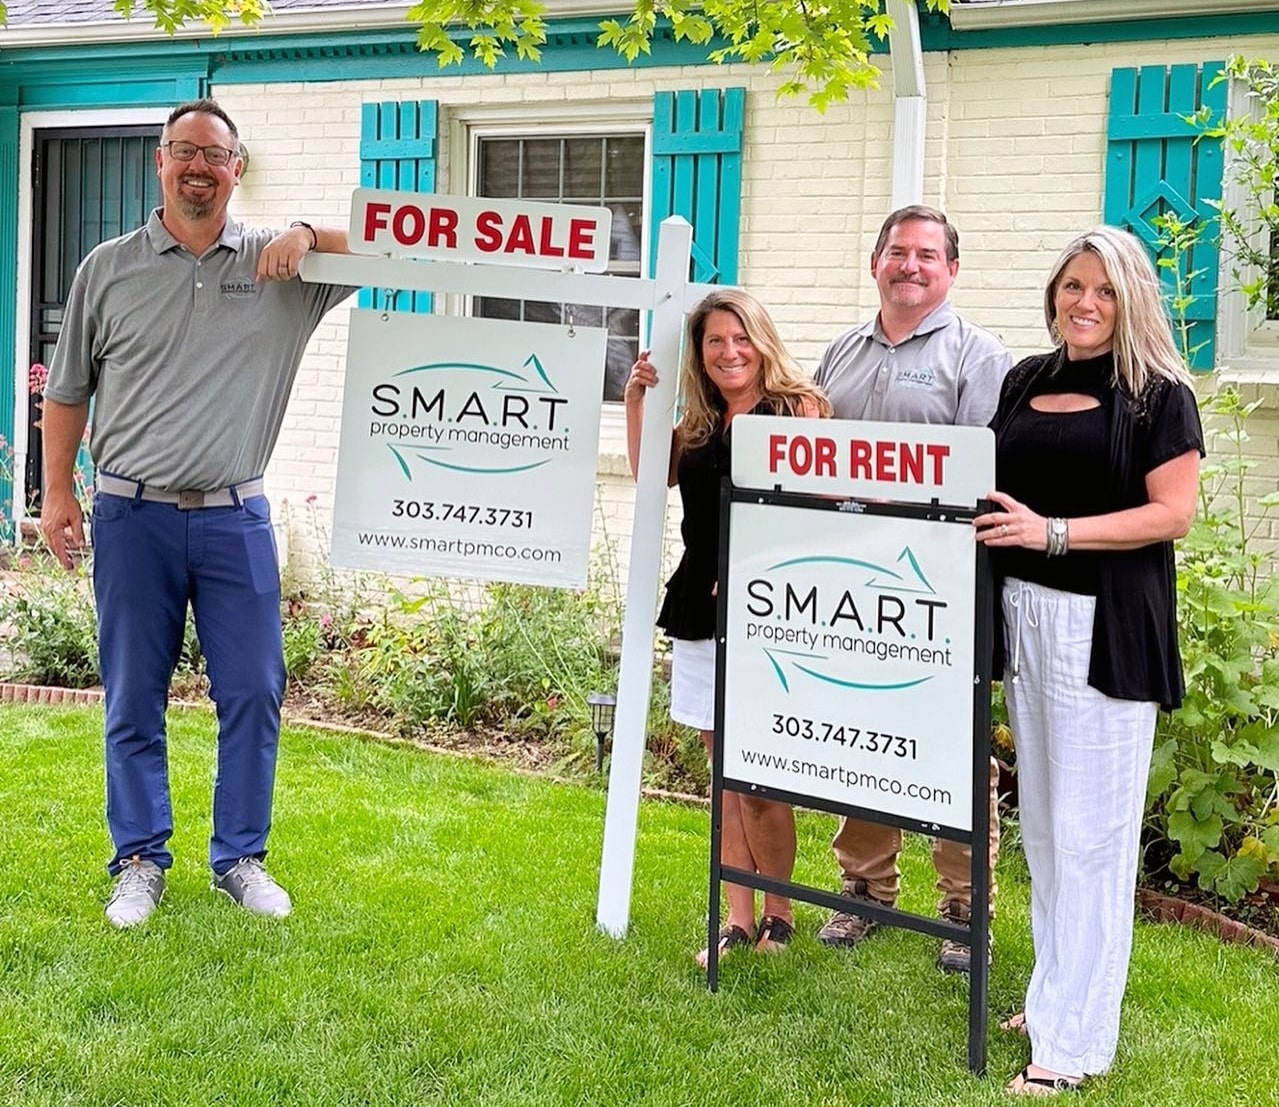 The Team at Smart Property Management